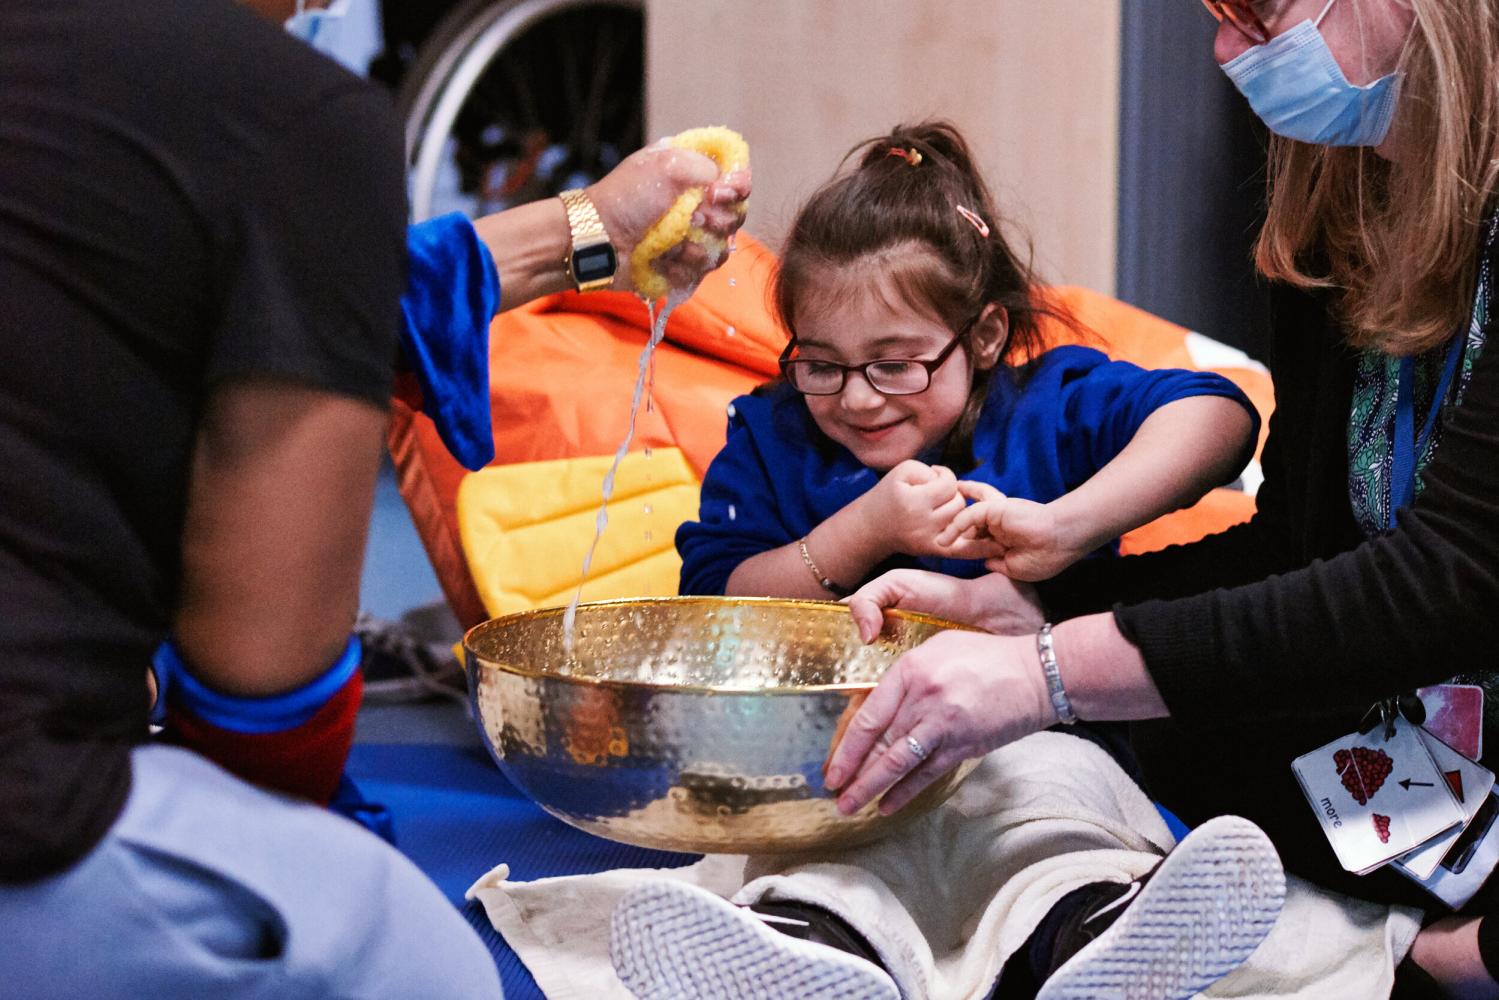 Young person sitting on a blue mat laughs as their supporting adult squeezes a sponge filled with water into a gold bowl